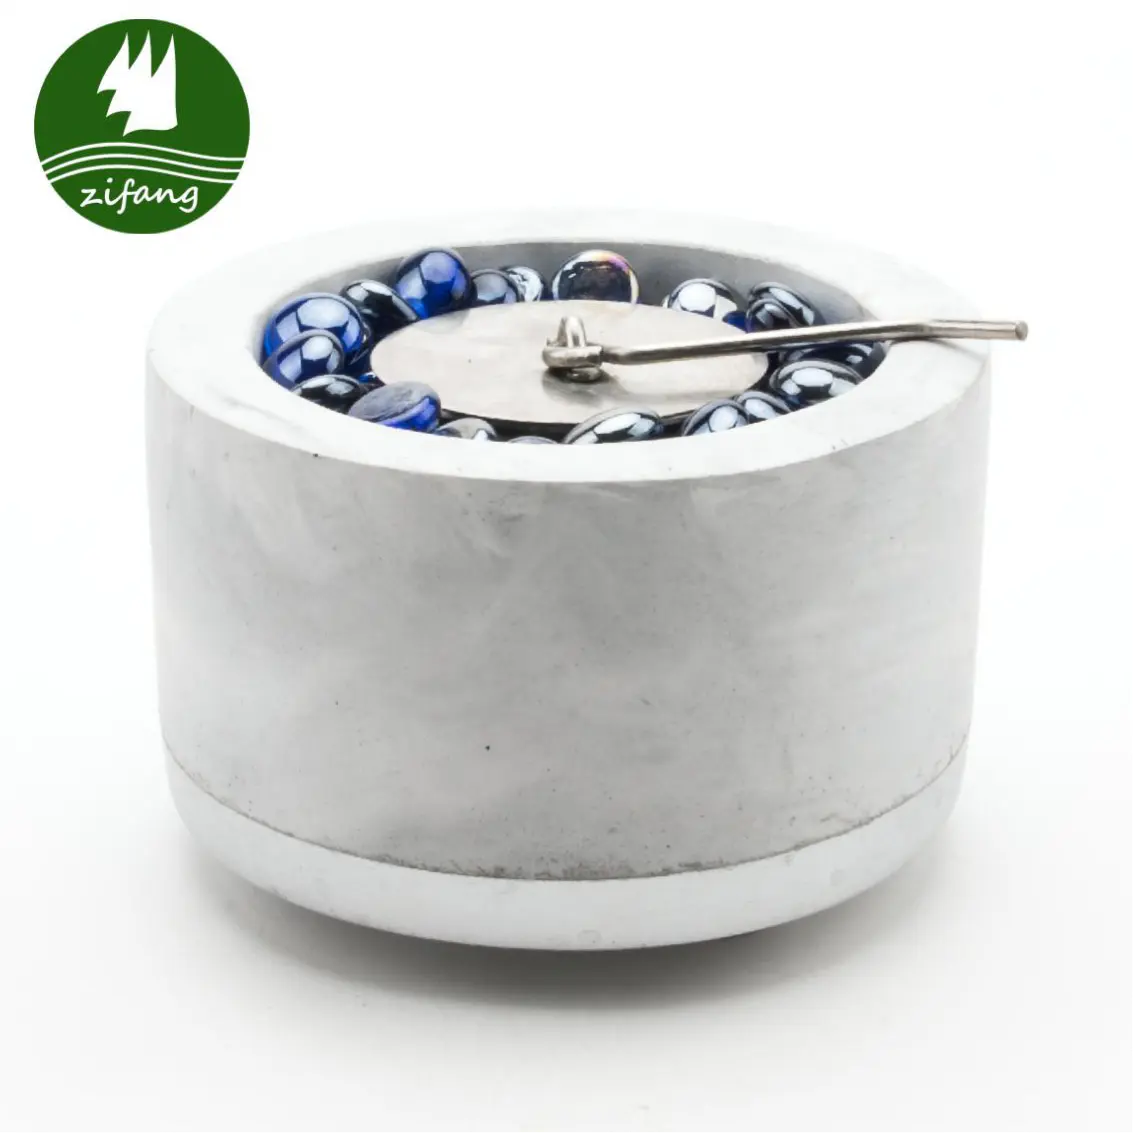 Table Fireplace Wholesale Portable Round Shape Fire Bowl Table Top Ethanol Fireplace